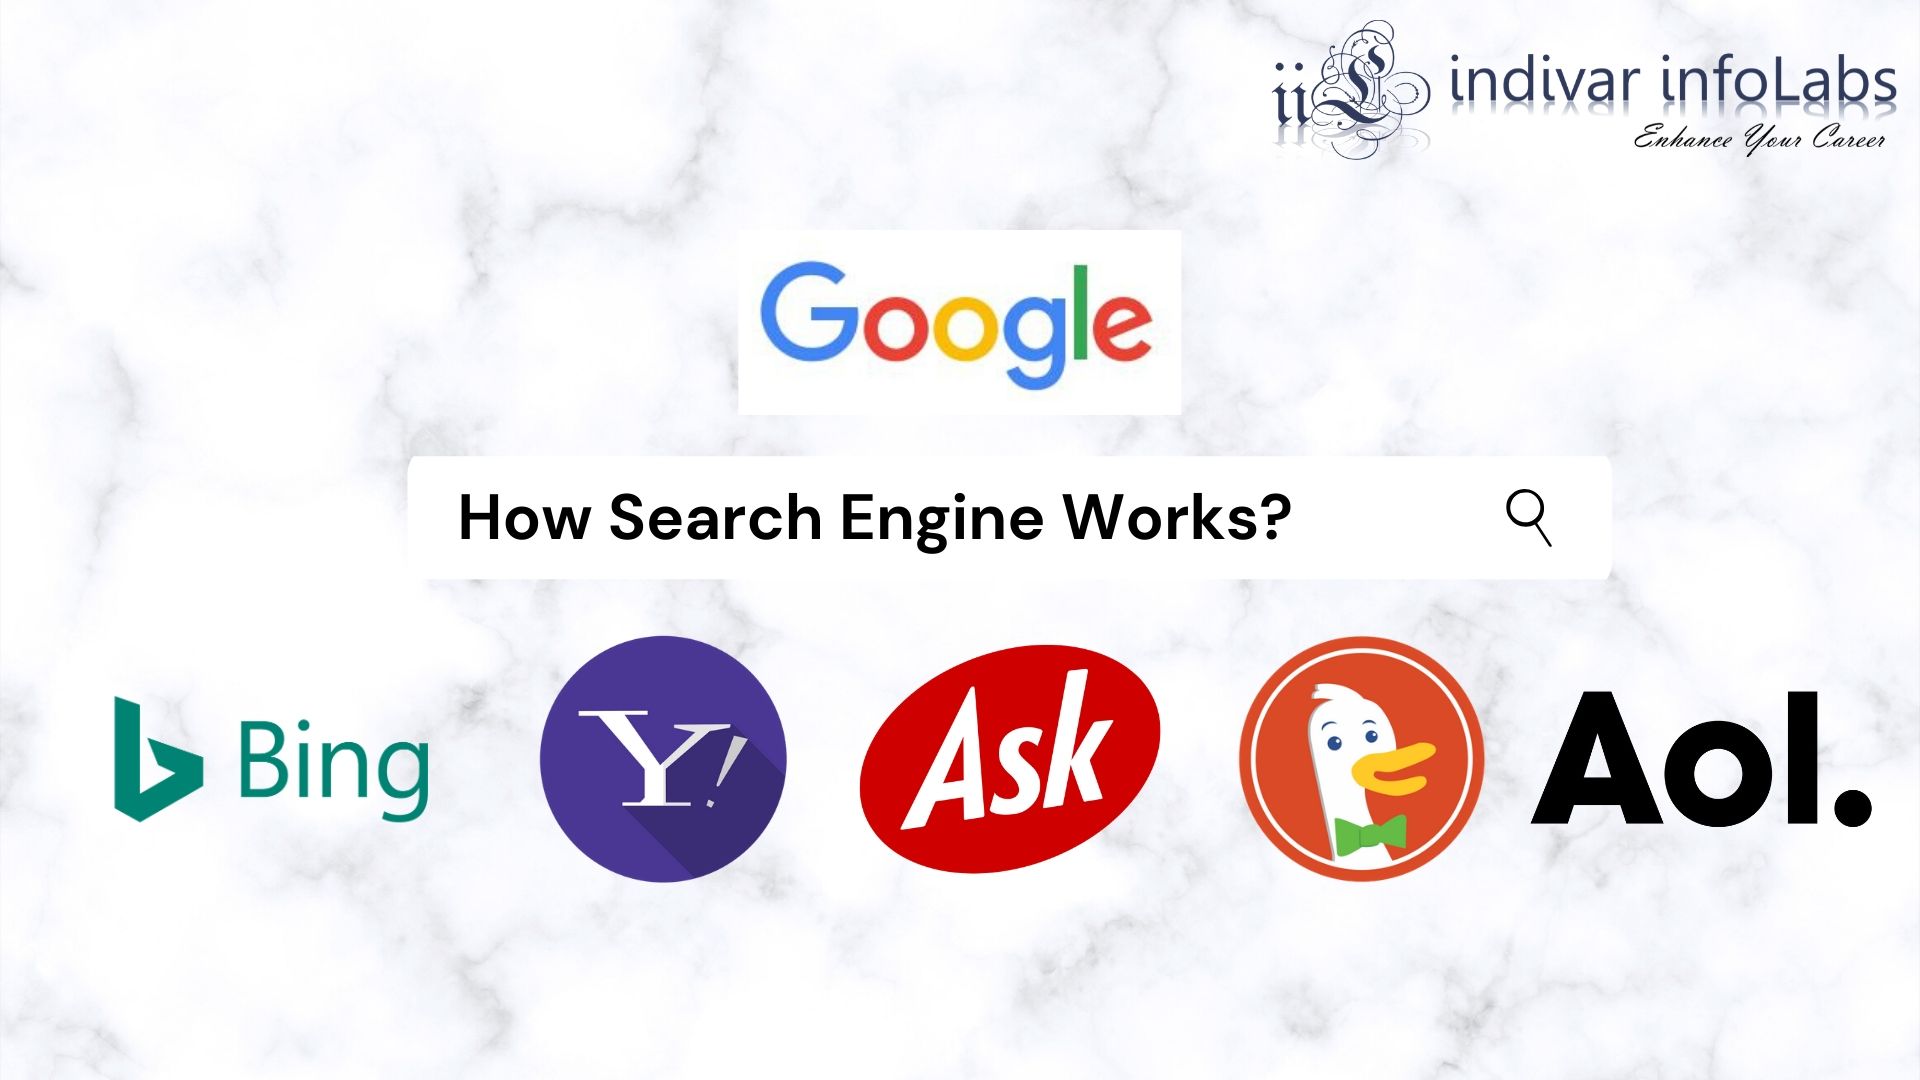 Do you Know how search engine works?